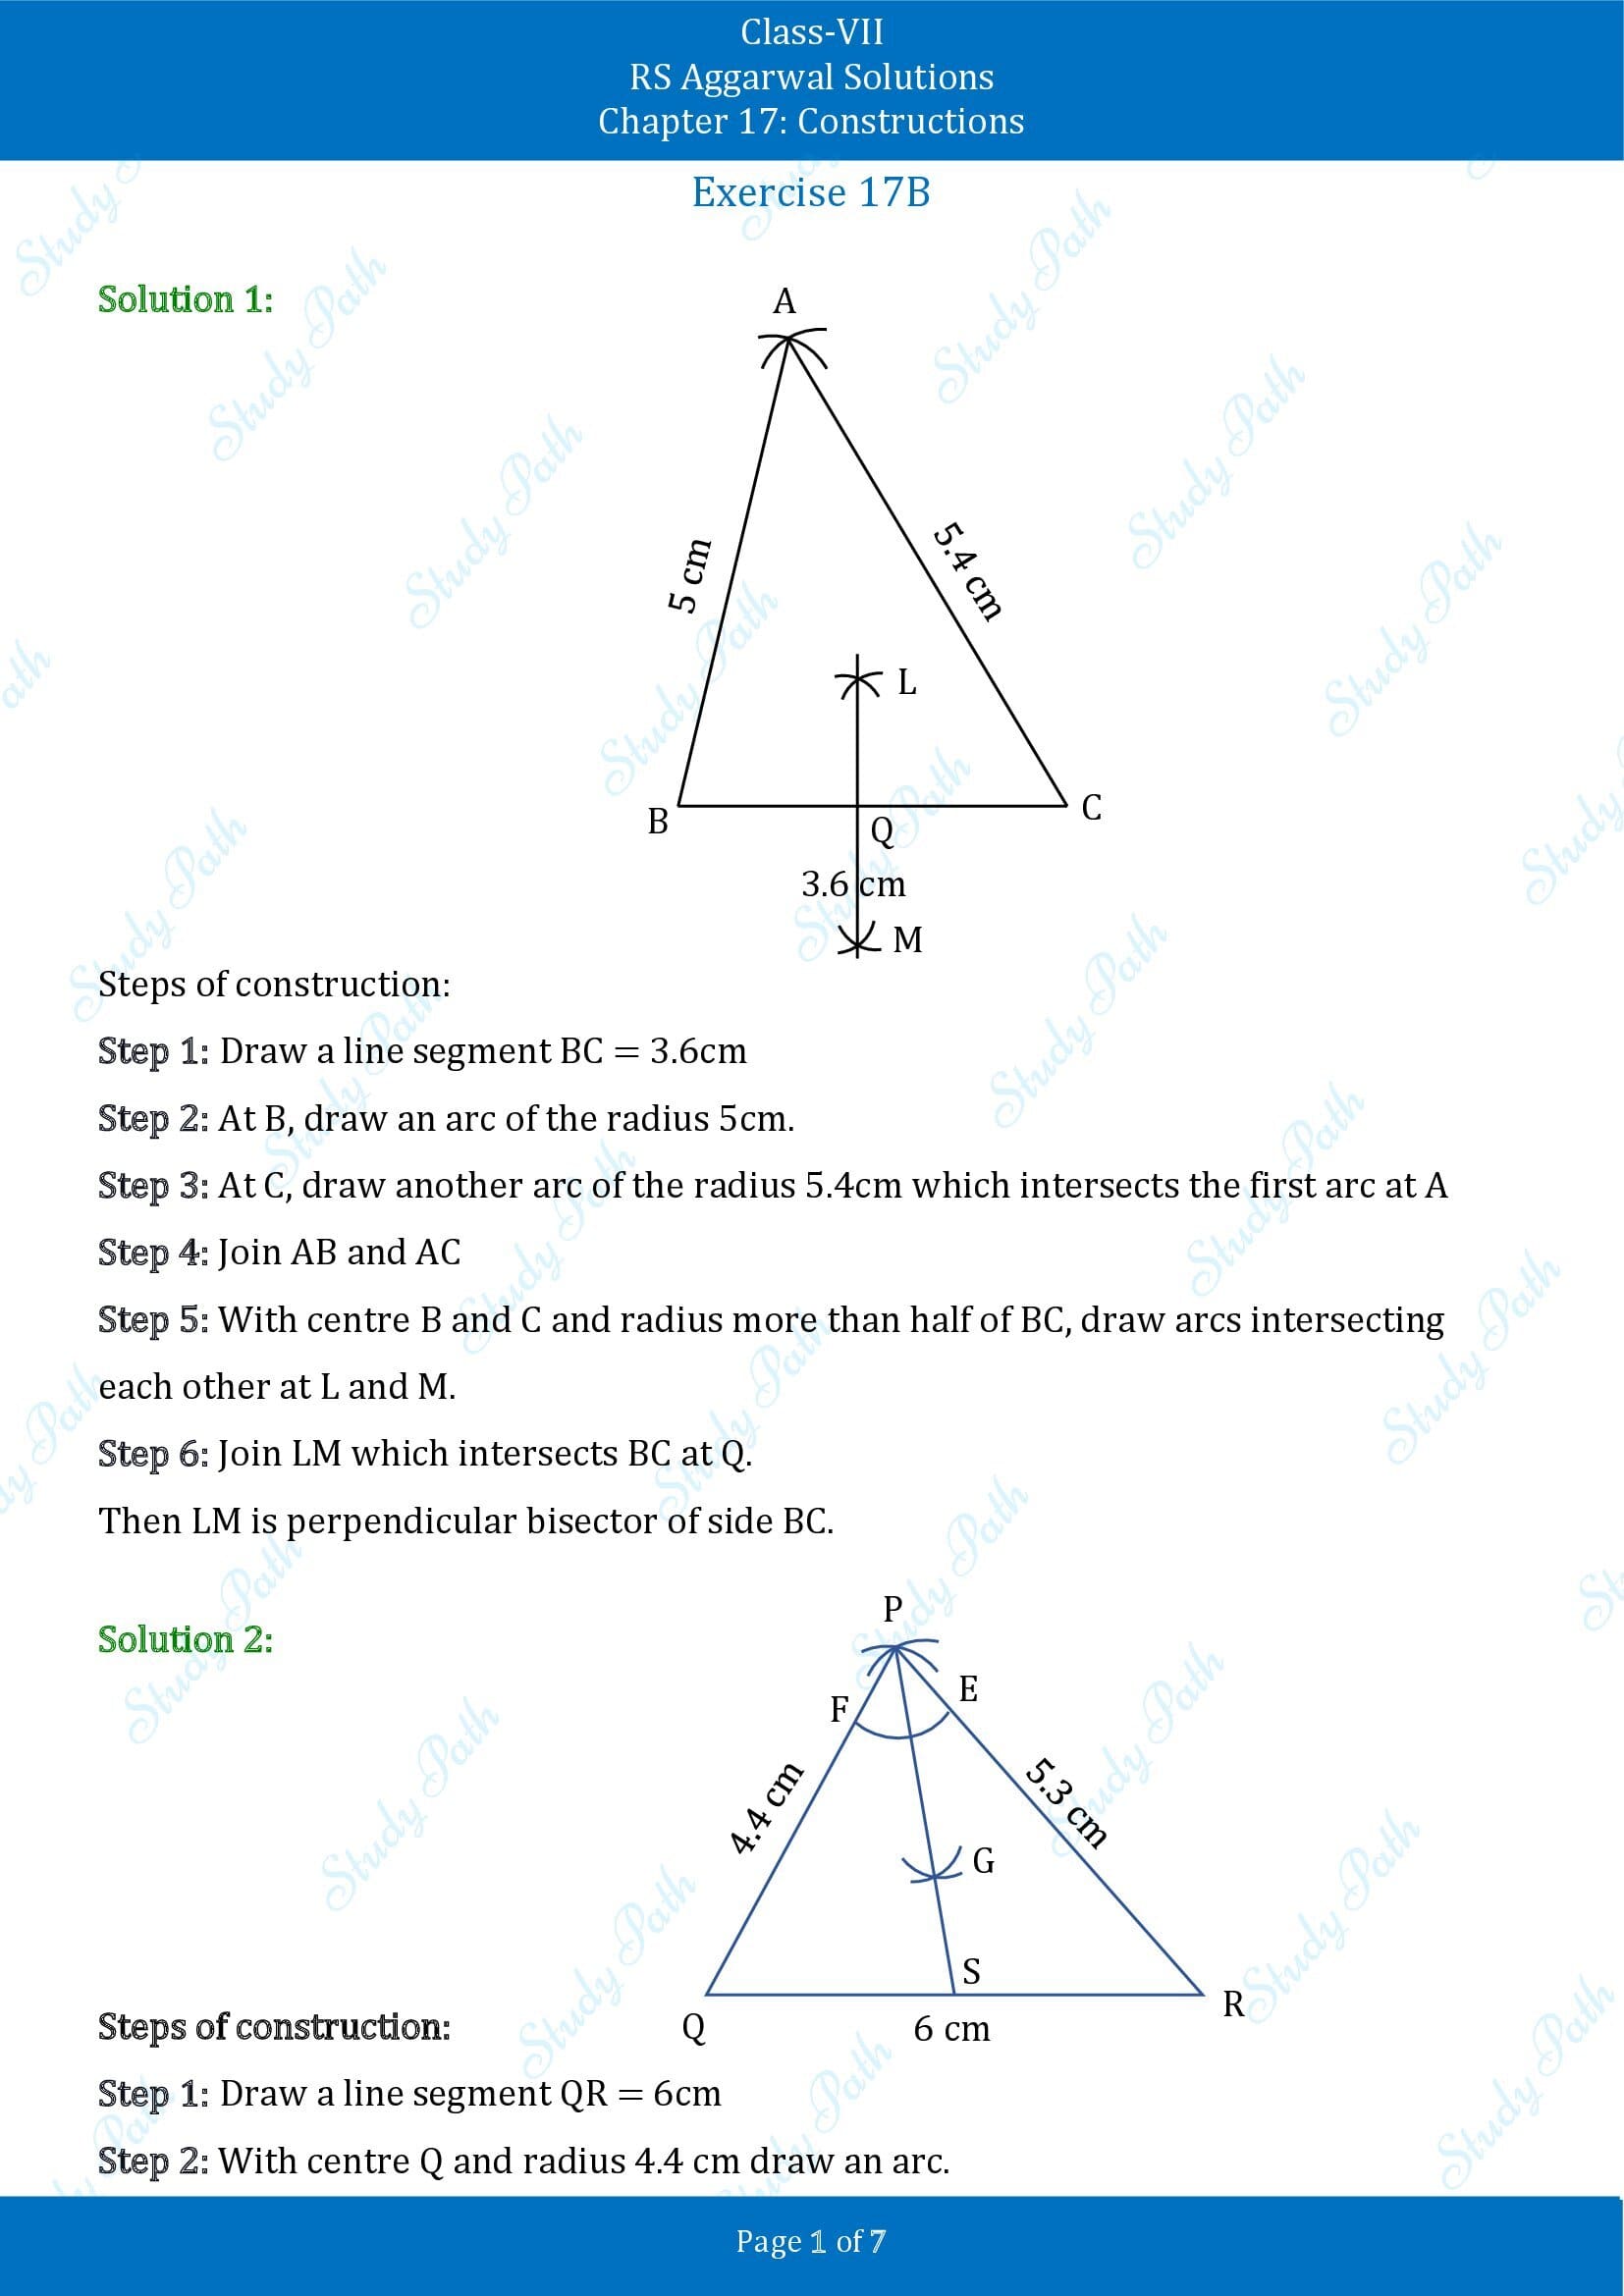 RS Aggarwal Solutions Class 7 Chapter 17 Constructions Exercise 17B 00001